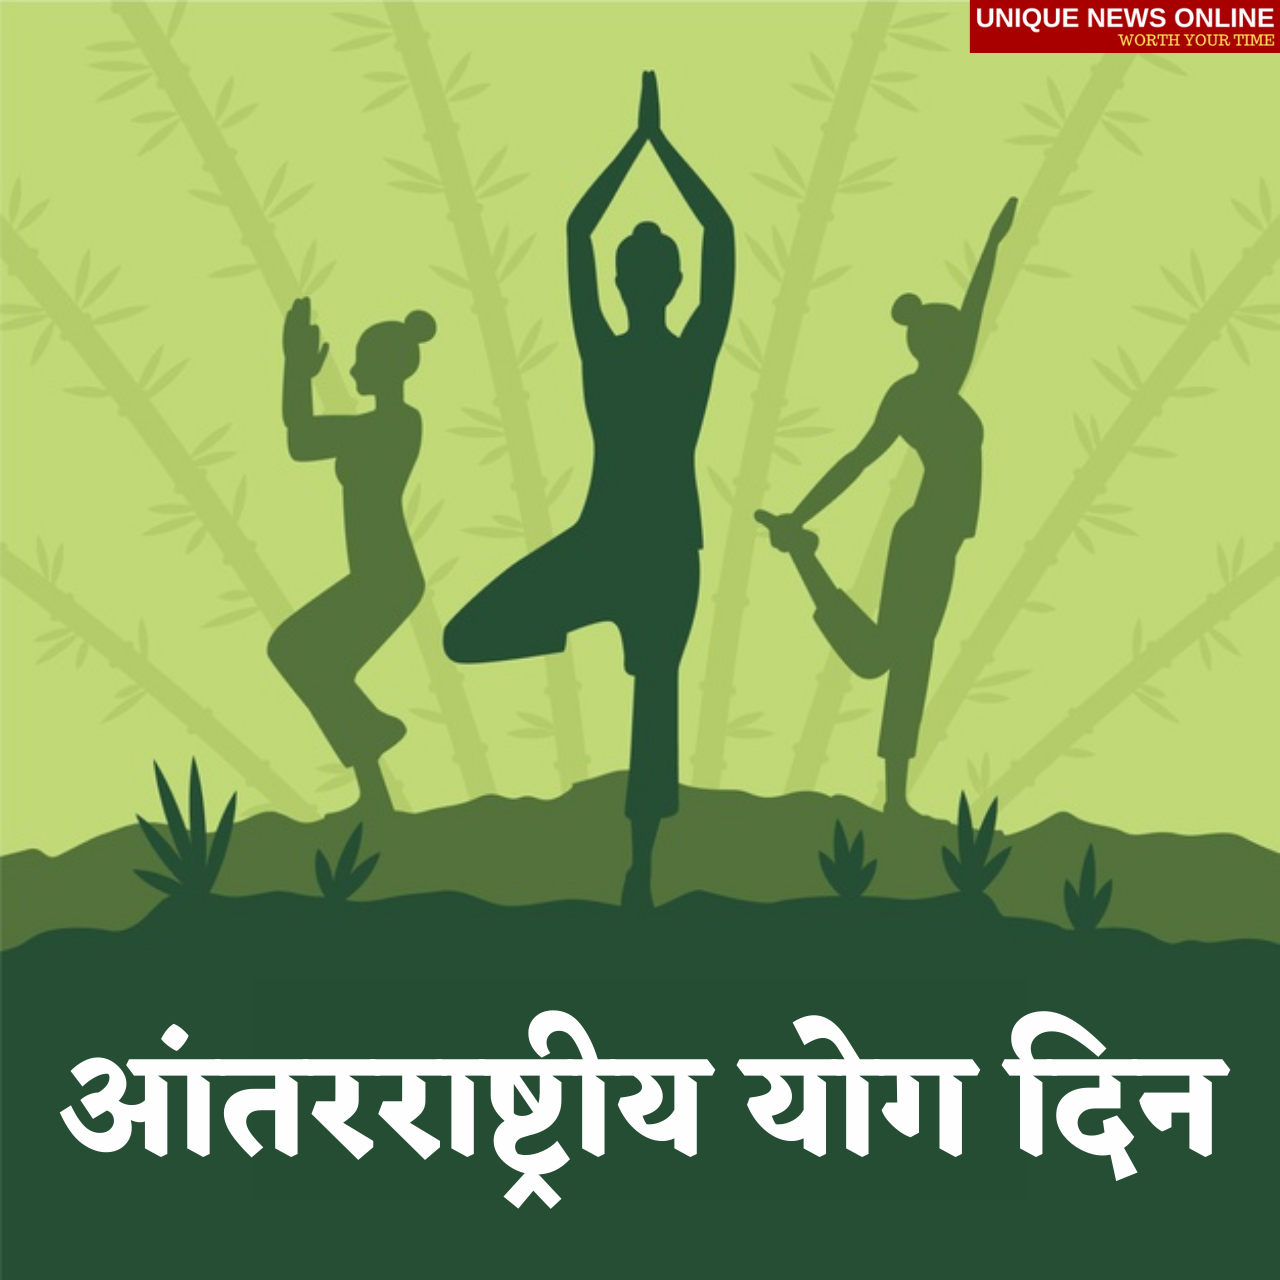 International Yoga Day 2021 Marathi Wishes, Images (Photos), Quotes, and Greetings to greet your Friends and Relatives